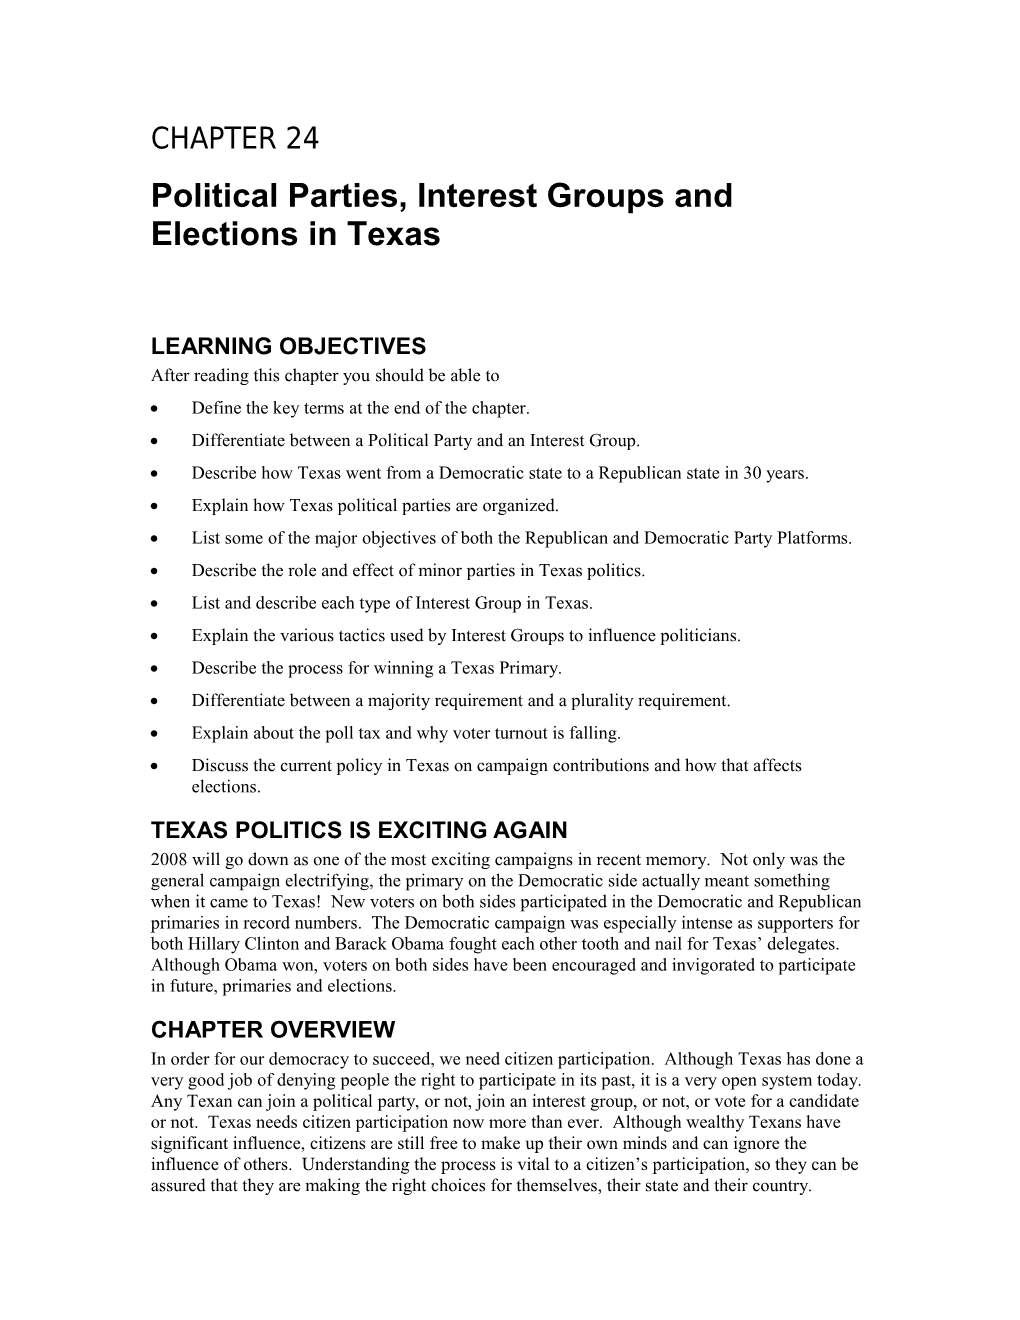 Political Parties, Interest Groups and Elections in Texas